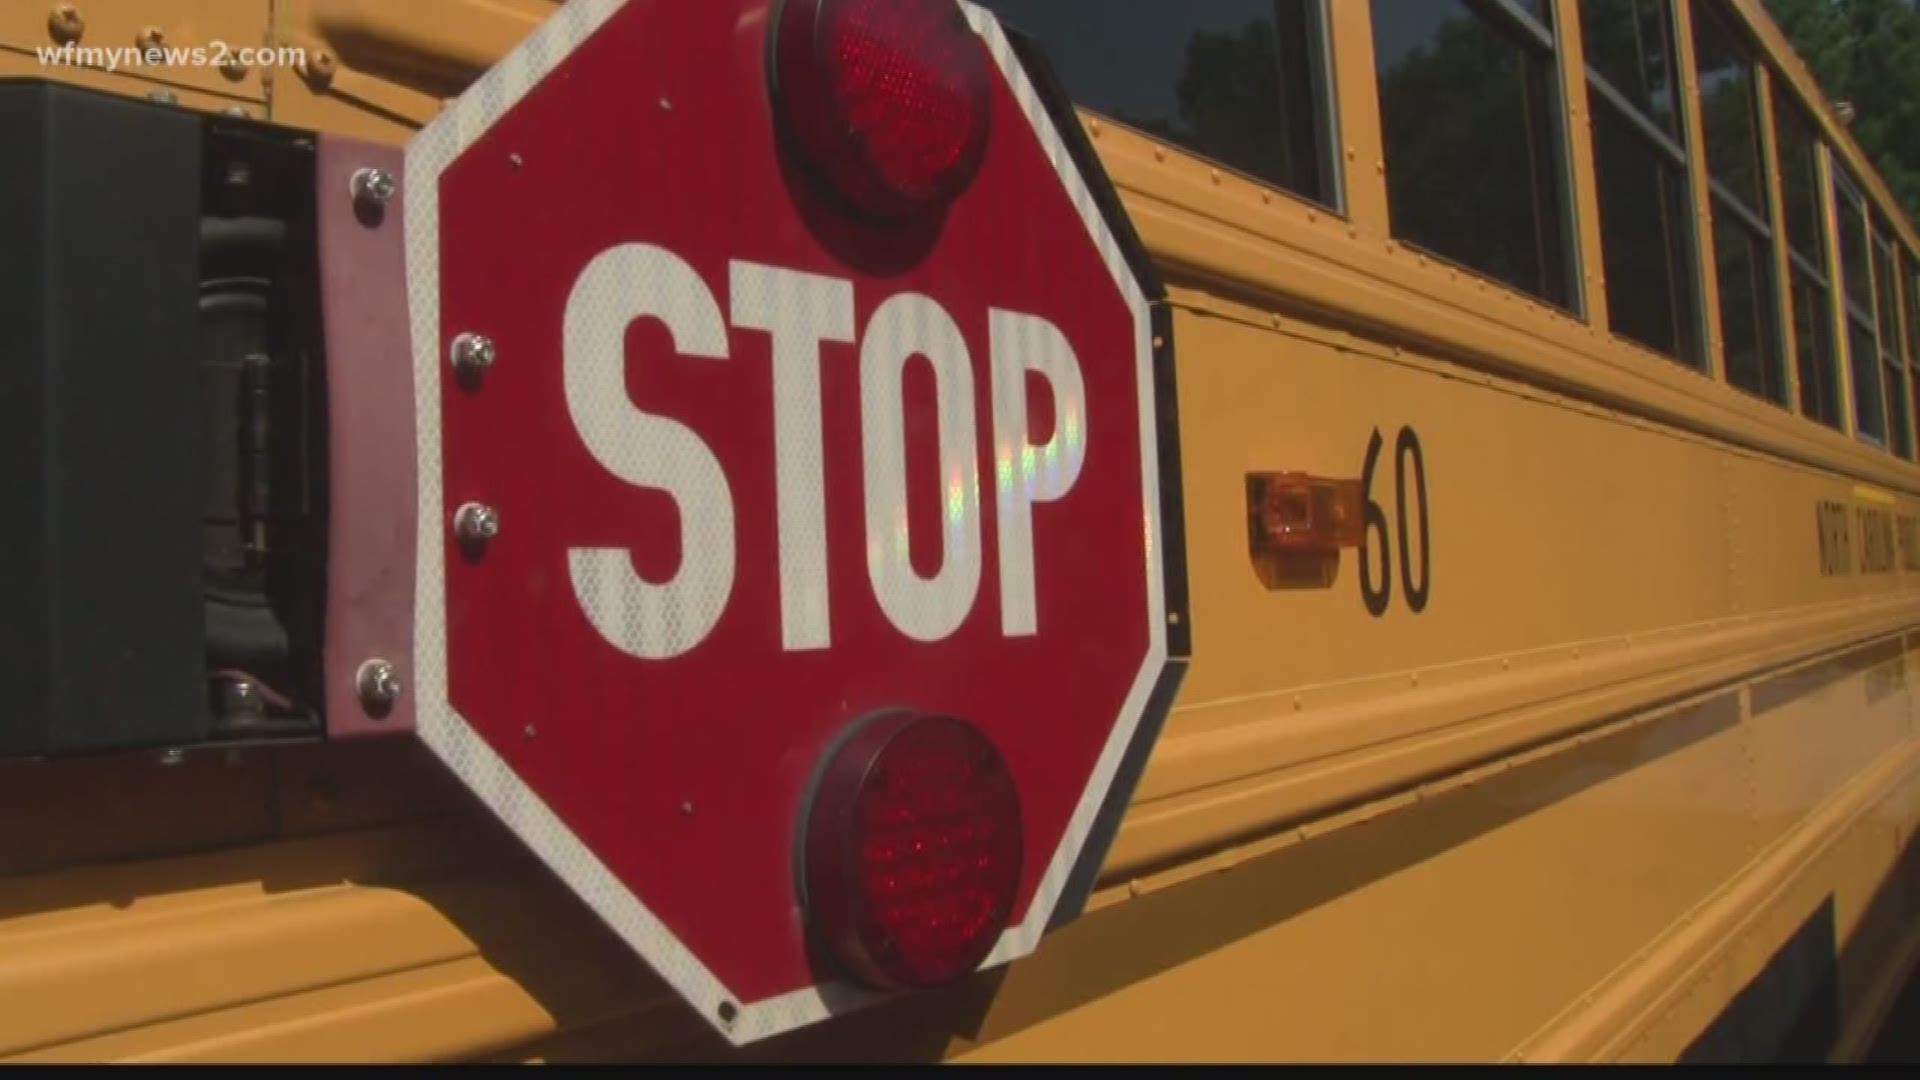 Video shows kids almost being hit while getting off the bus, we talked to local law enforcement on how kids can stay safe while waiting for the school bus